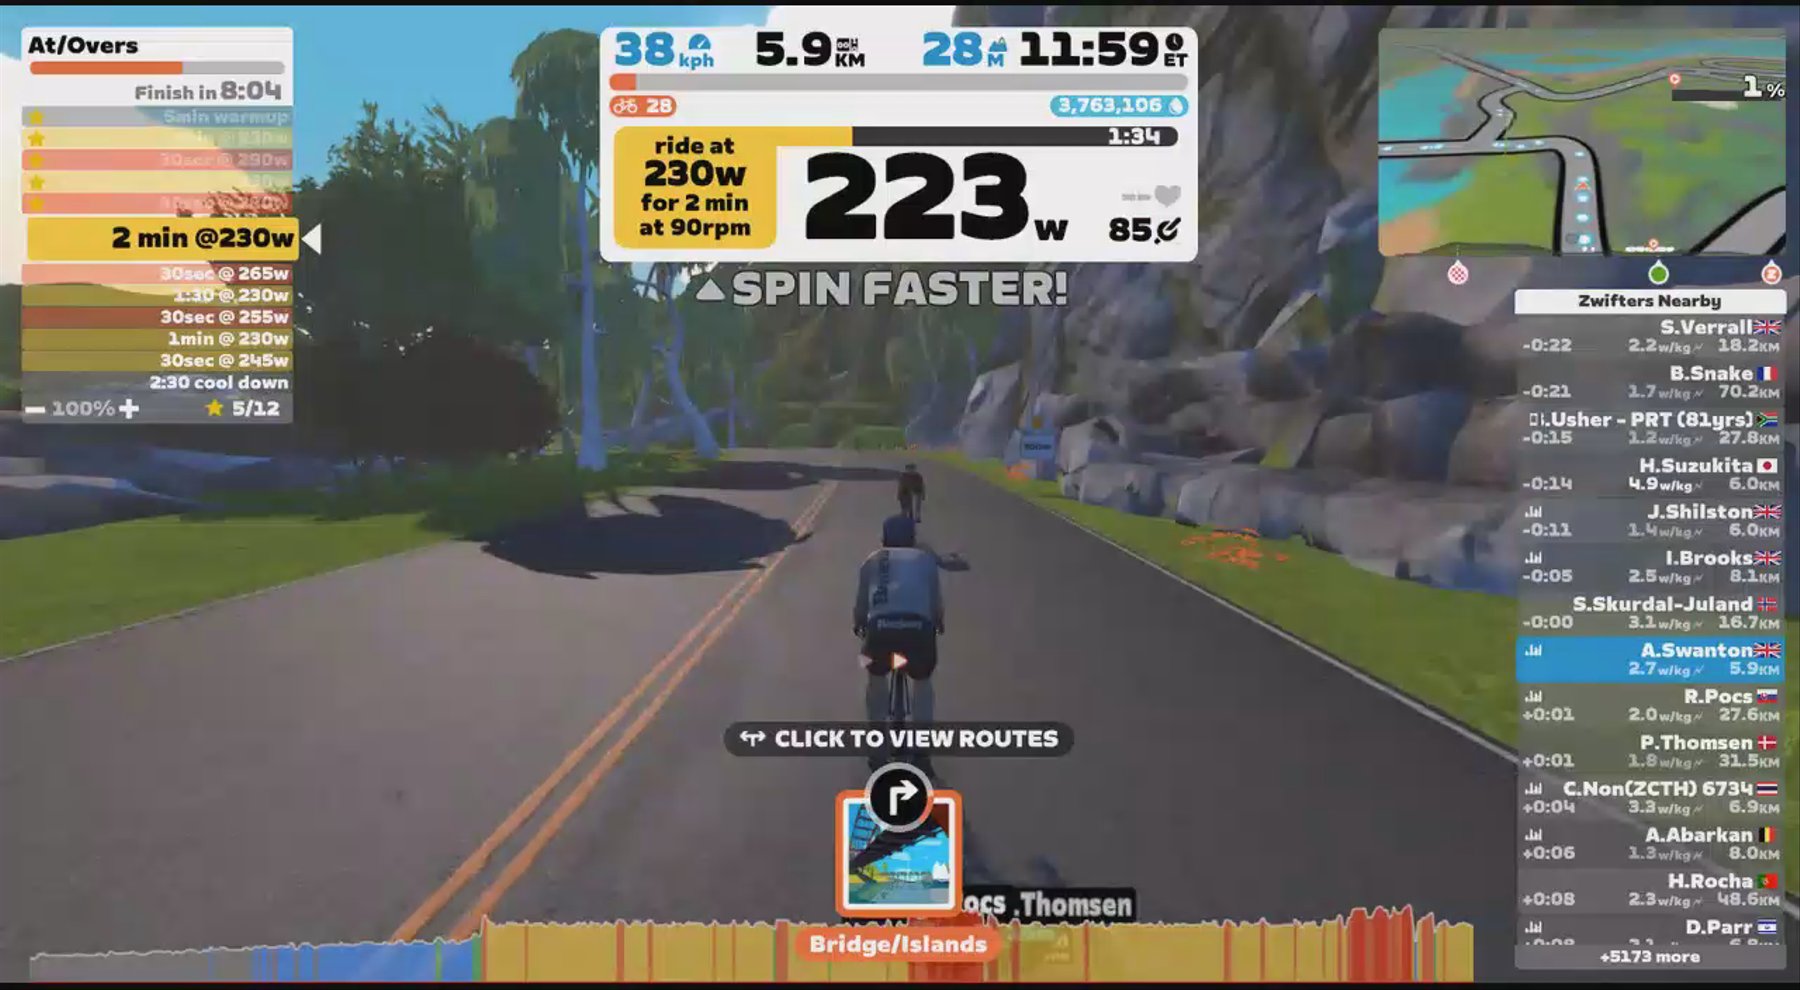 Zwift - At/Overs in Watopia